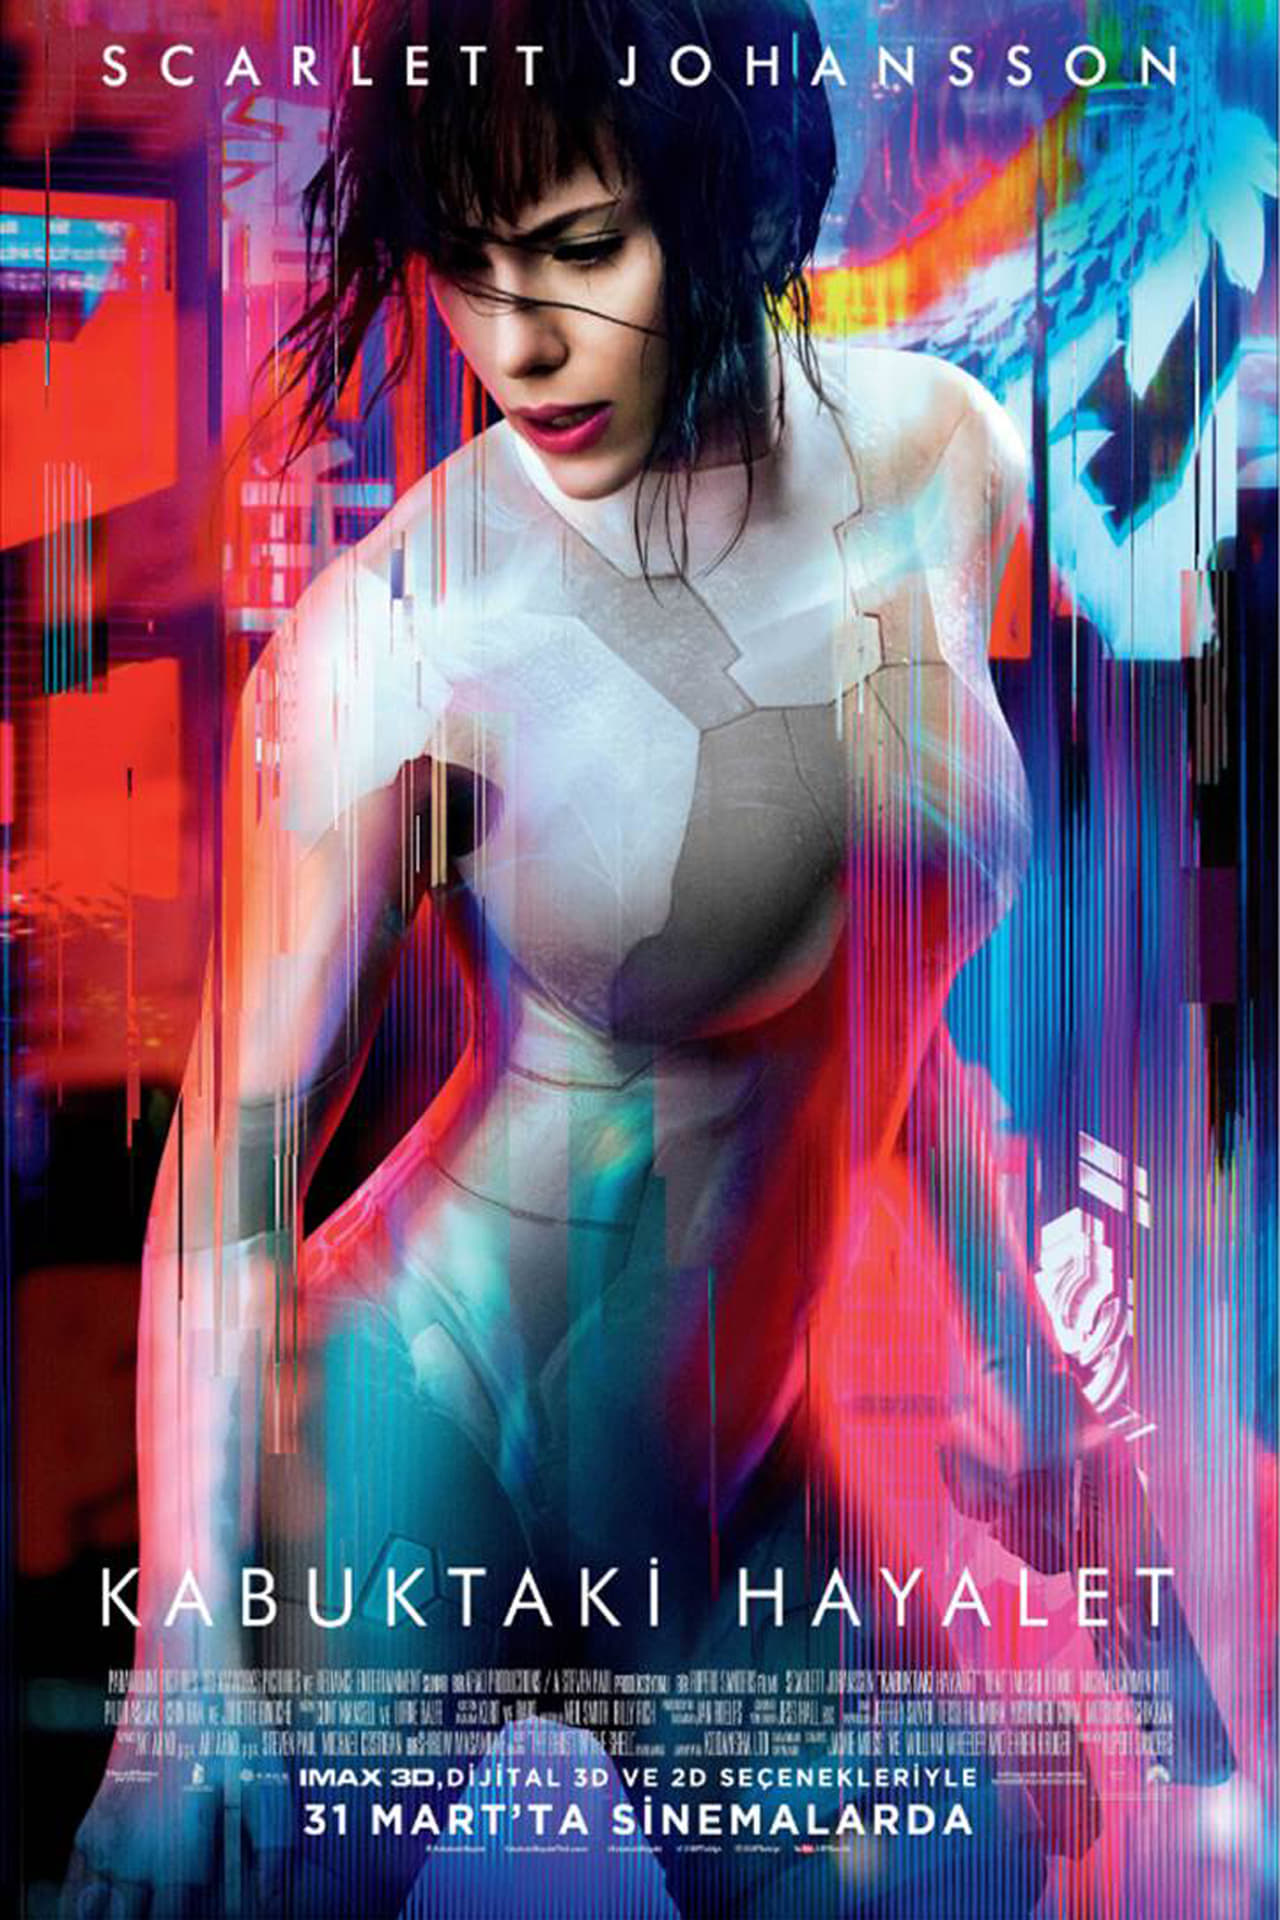 Ghost in the Shell (2017) 640Kbps 23.976Fps 48Khz 5.1Ch DD+ NF E-AC3 Turkish Audio TAC